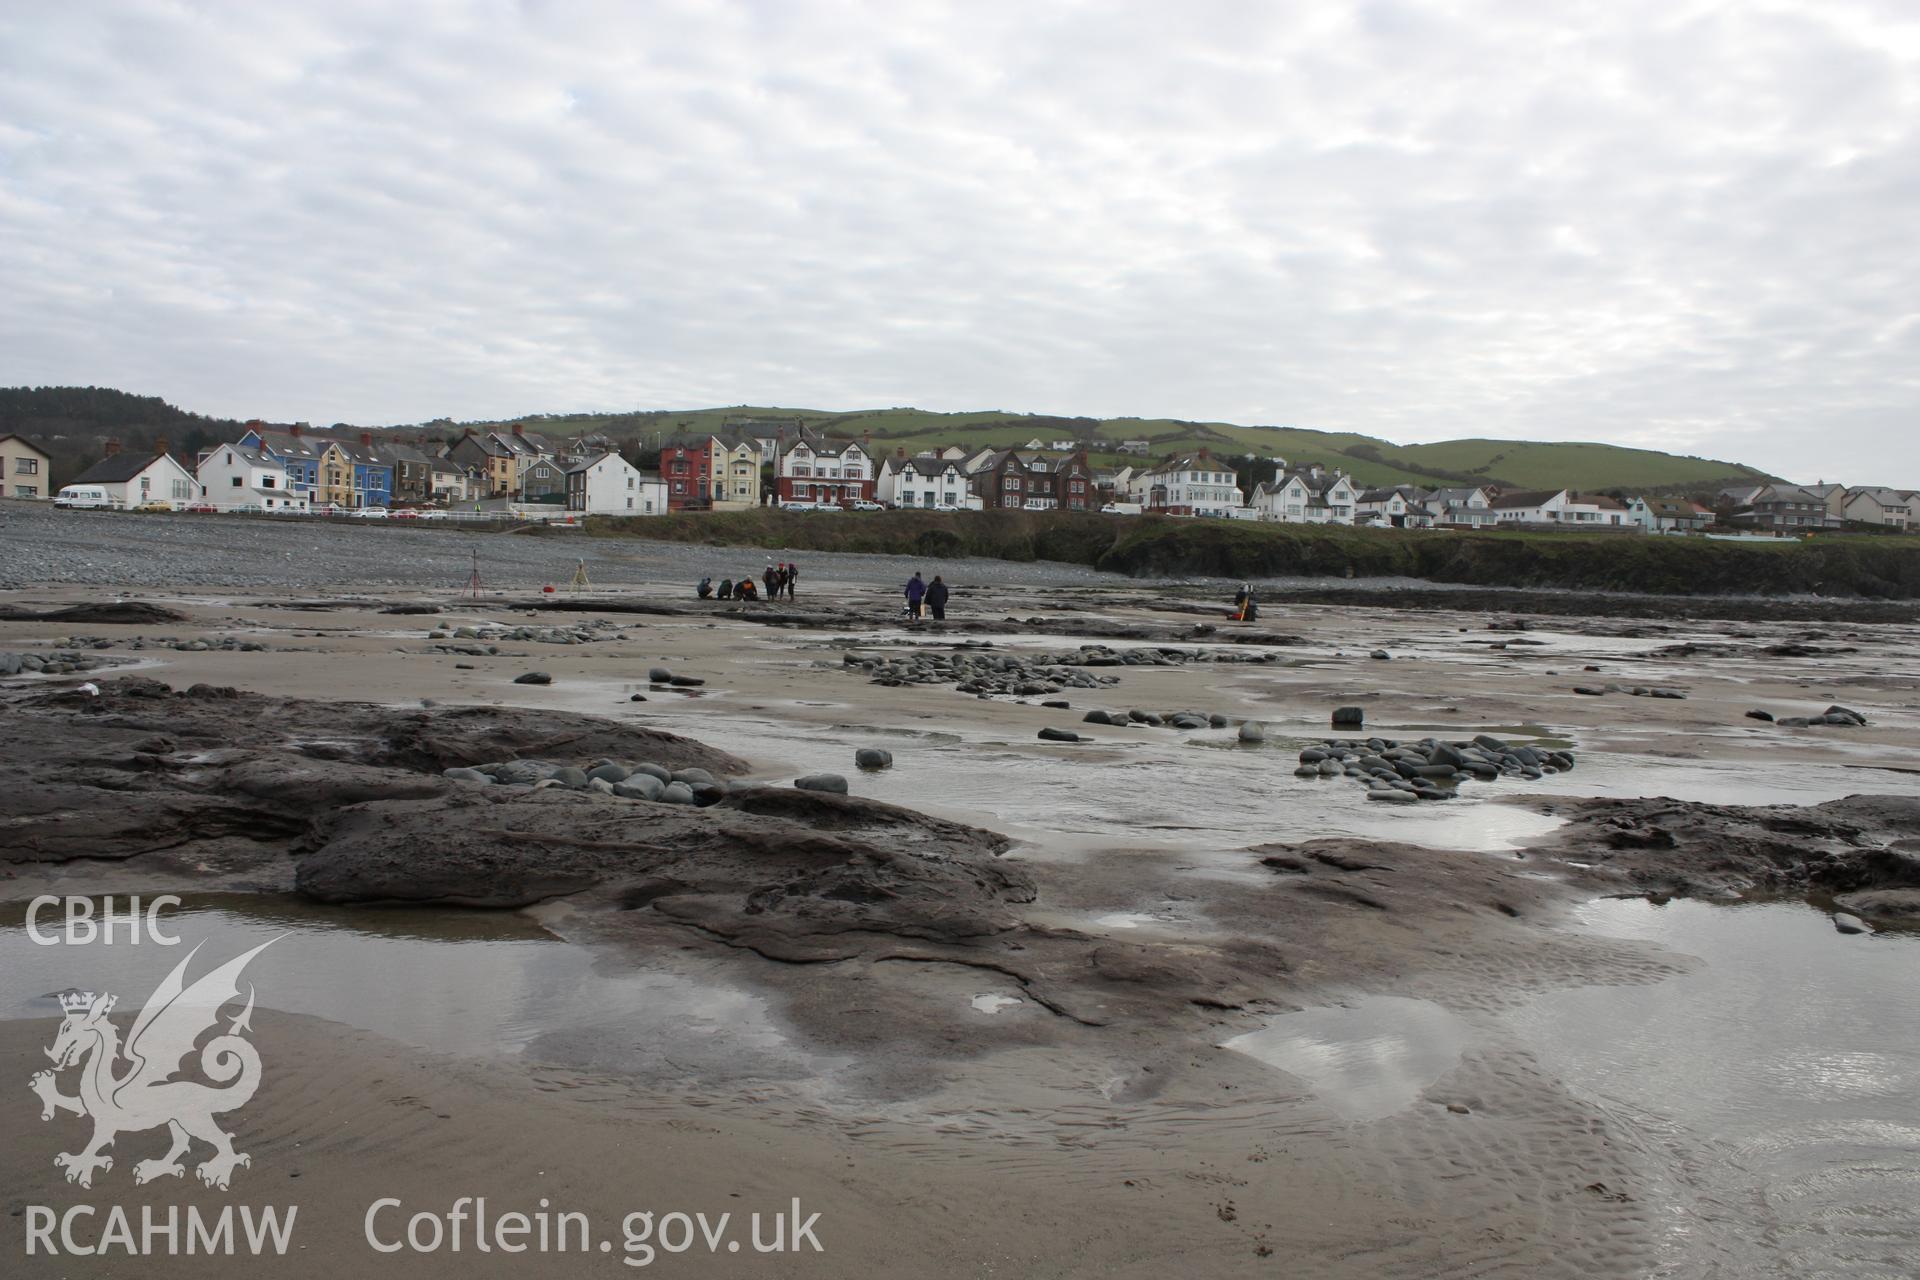 Borth submerged forest (between RNLI lifeboat station and upper Borth), looking east towards High Street. Showing extent of peat exposures at low tide.